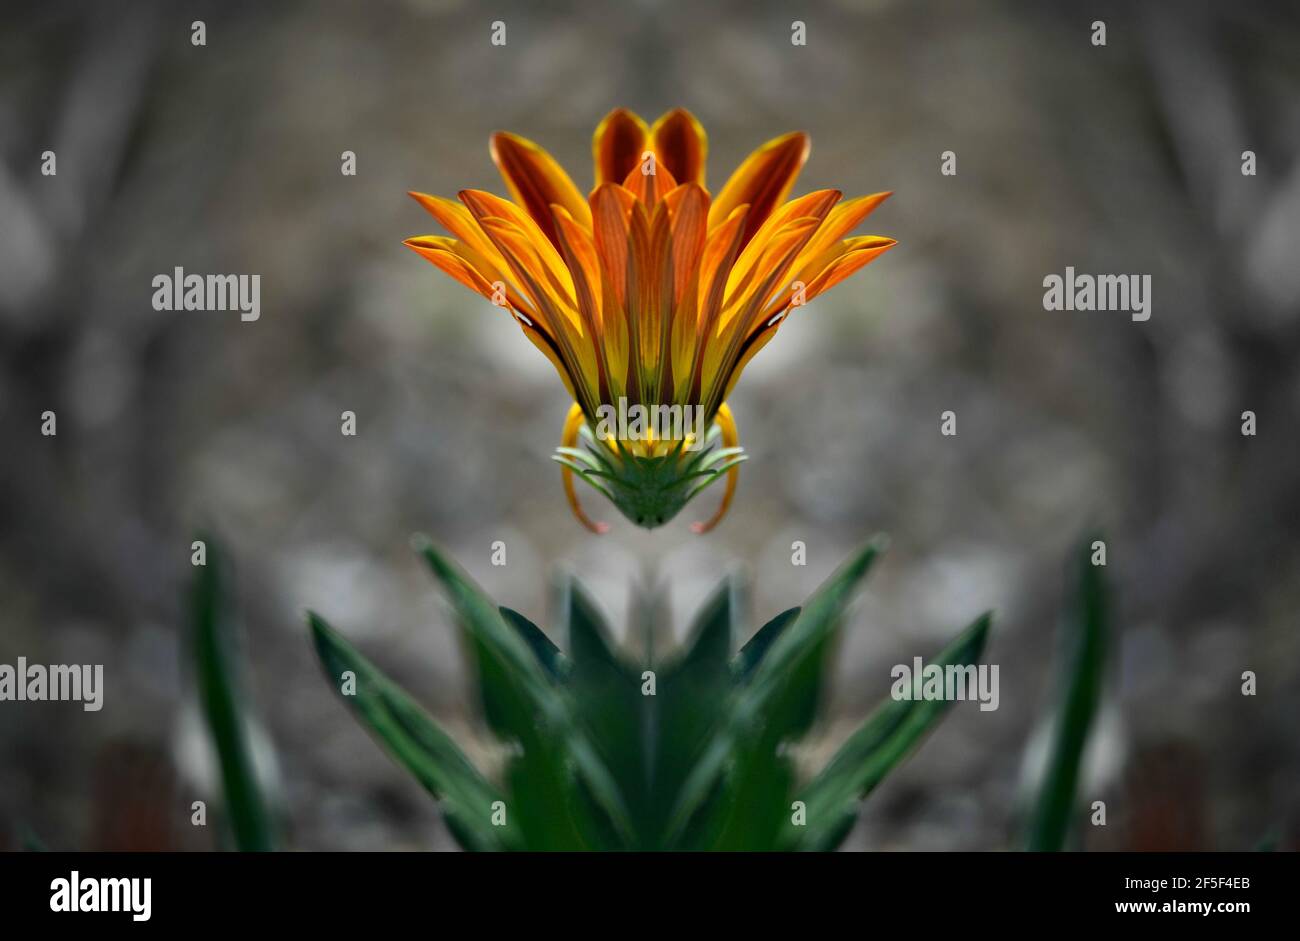 Gazania daisy blooming bud on an abstract composition. Stock Photo